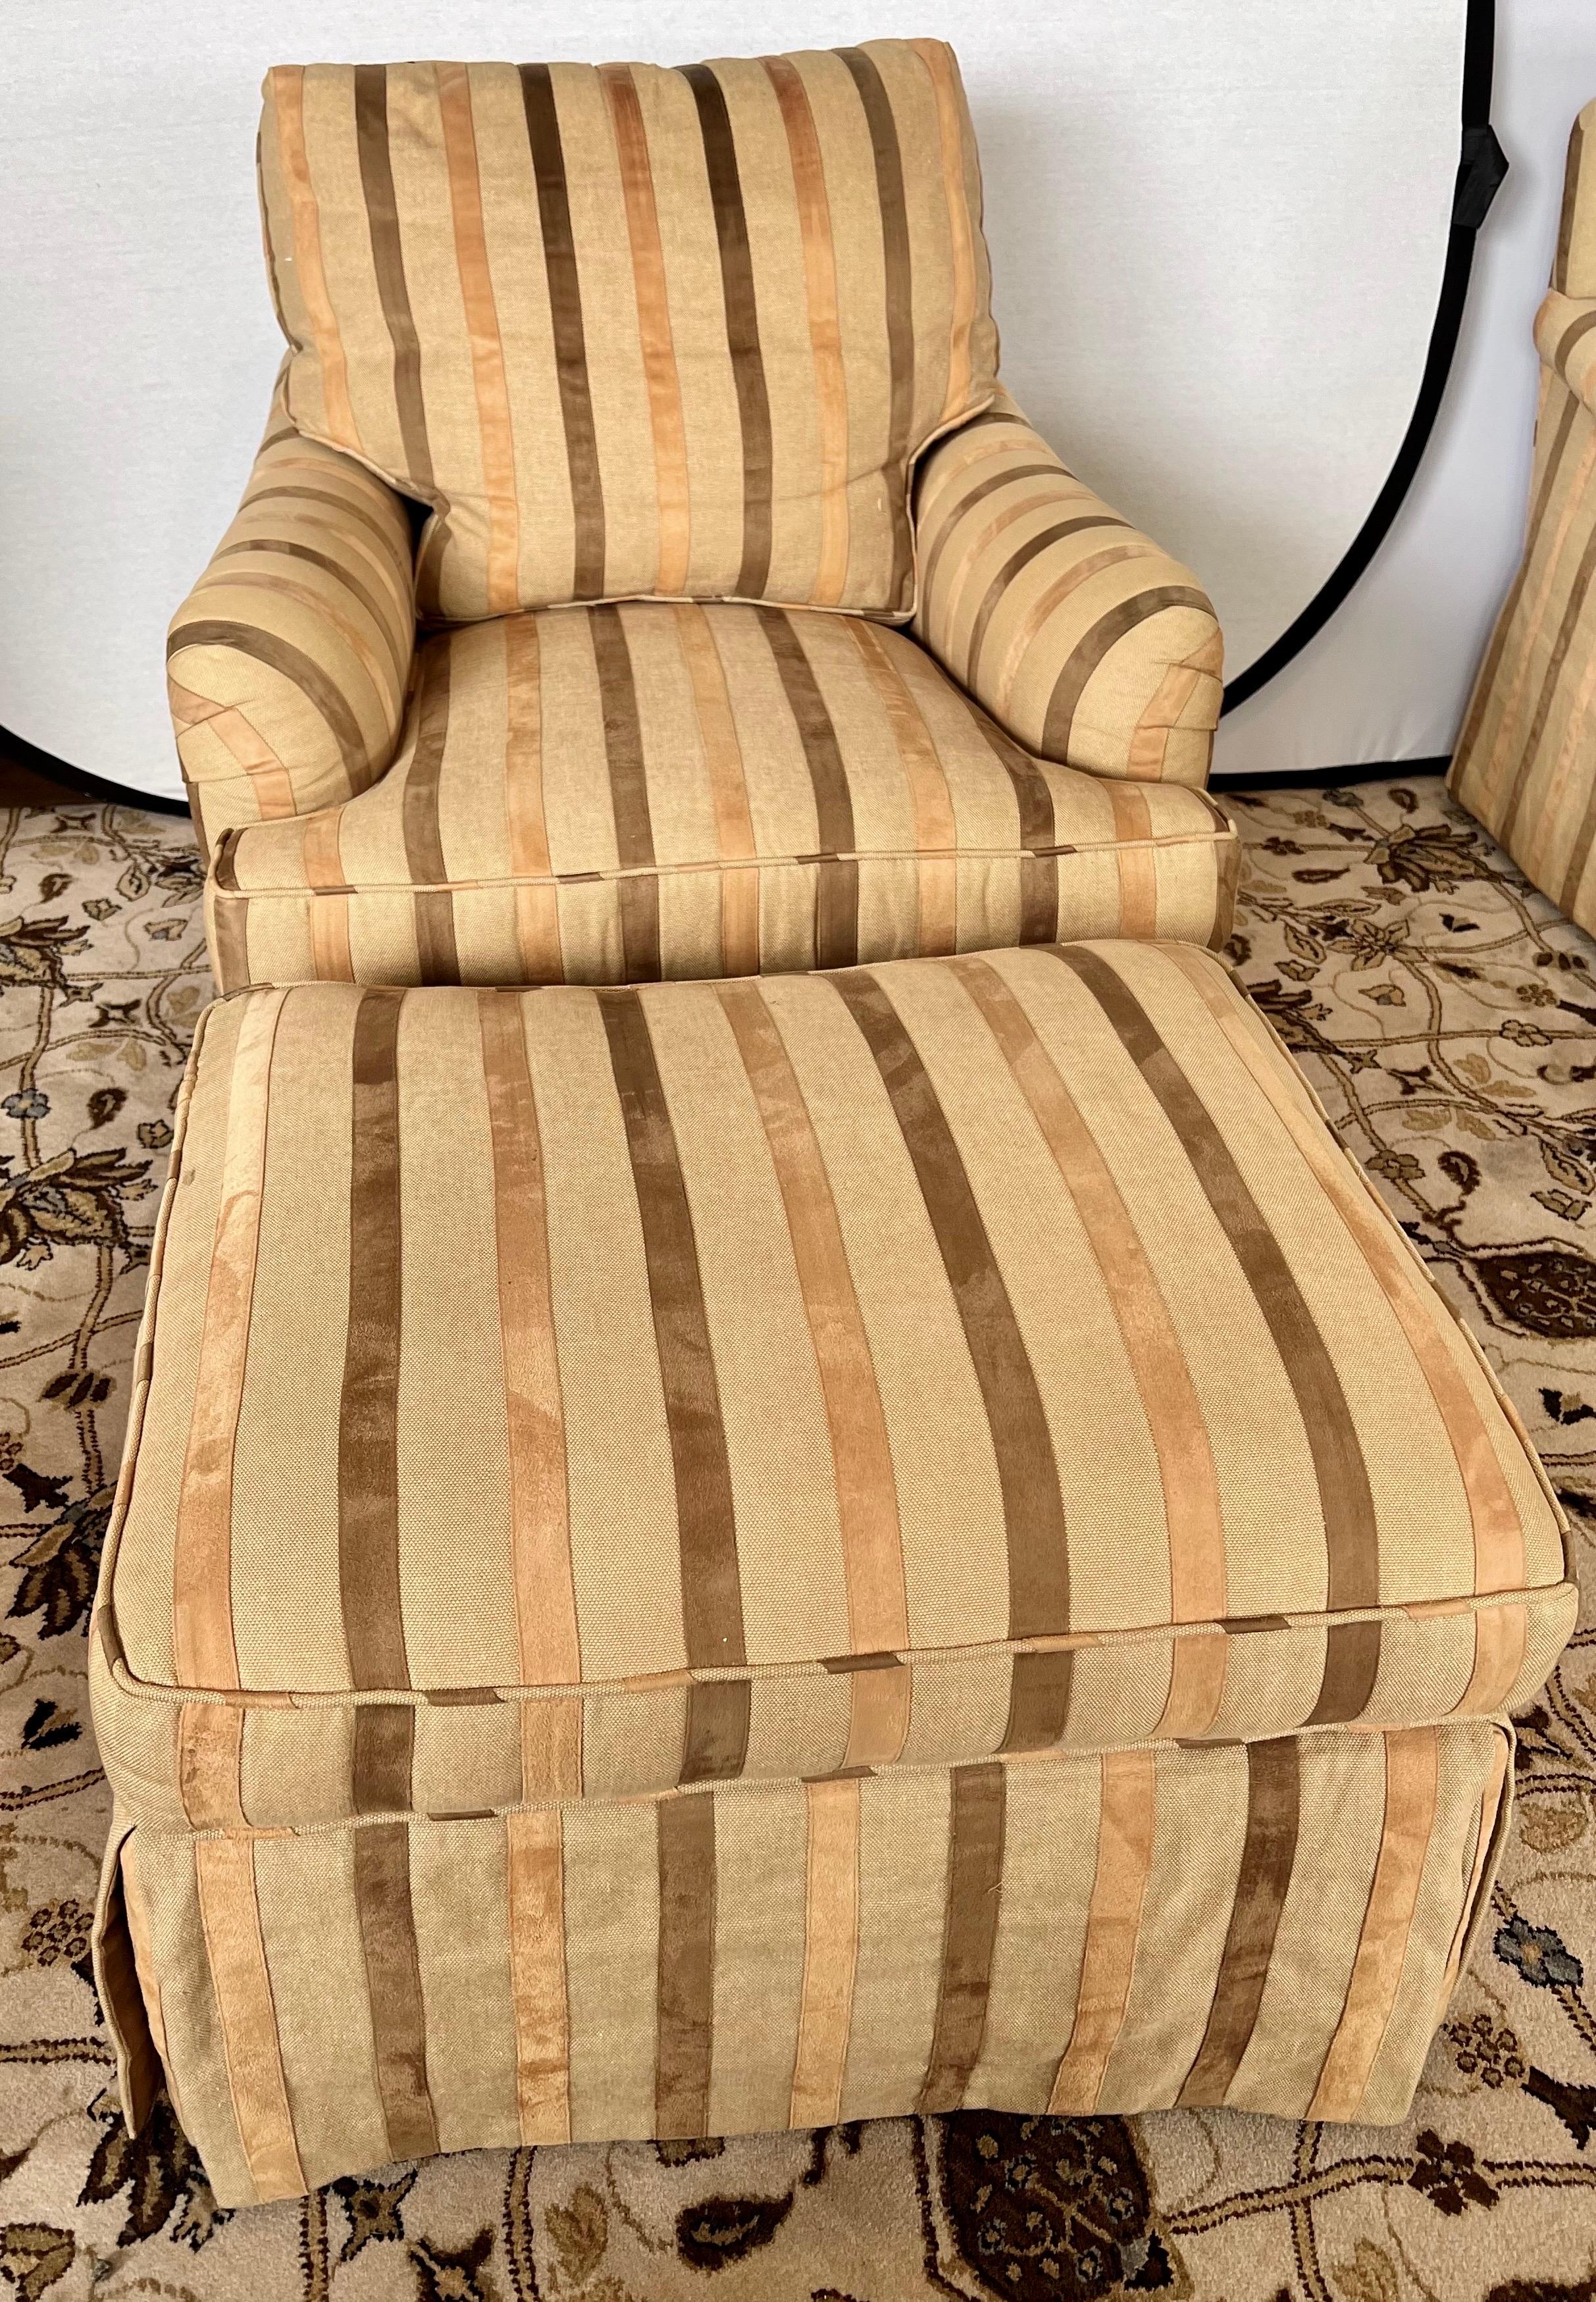 Signed Baker Furniture chair and ottoman combo where upholstery includes stripes that are done in suede - one with saddle brown and one with darker brown.  Age appropriate wear but remember Baker Furniture makes some of the finest furniture in the